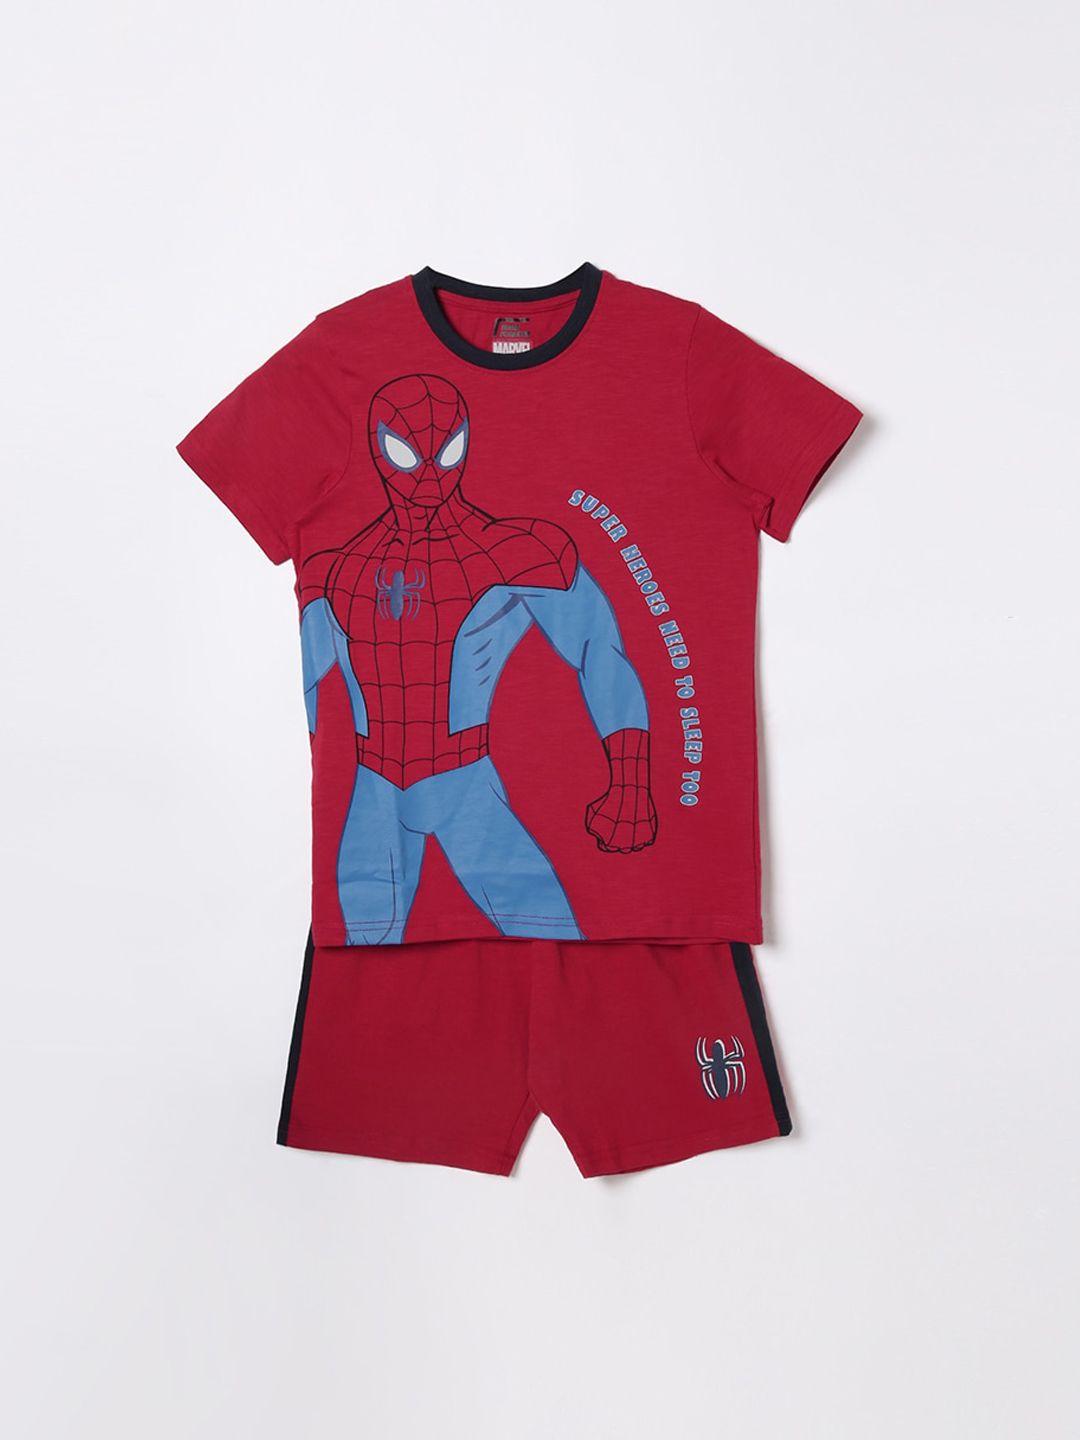 fame forever by lifestyle boys marvel printed clothing set